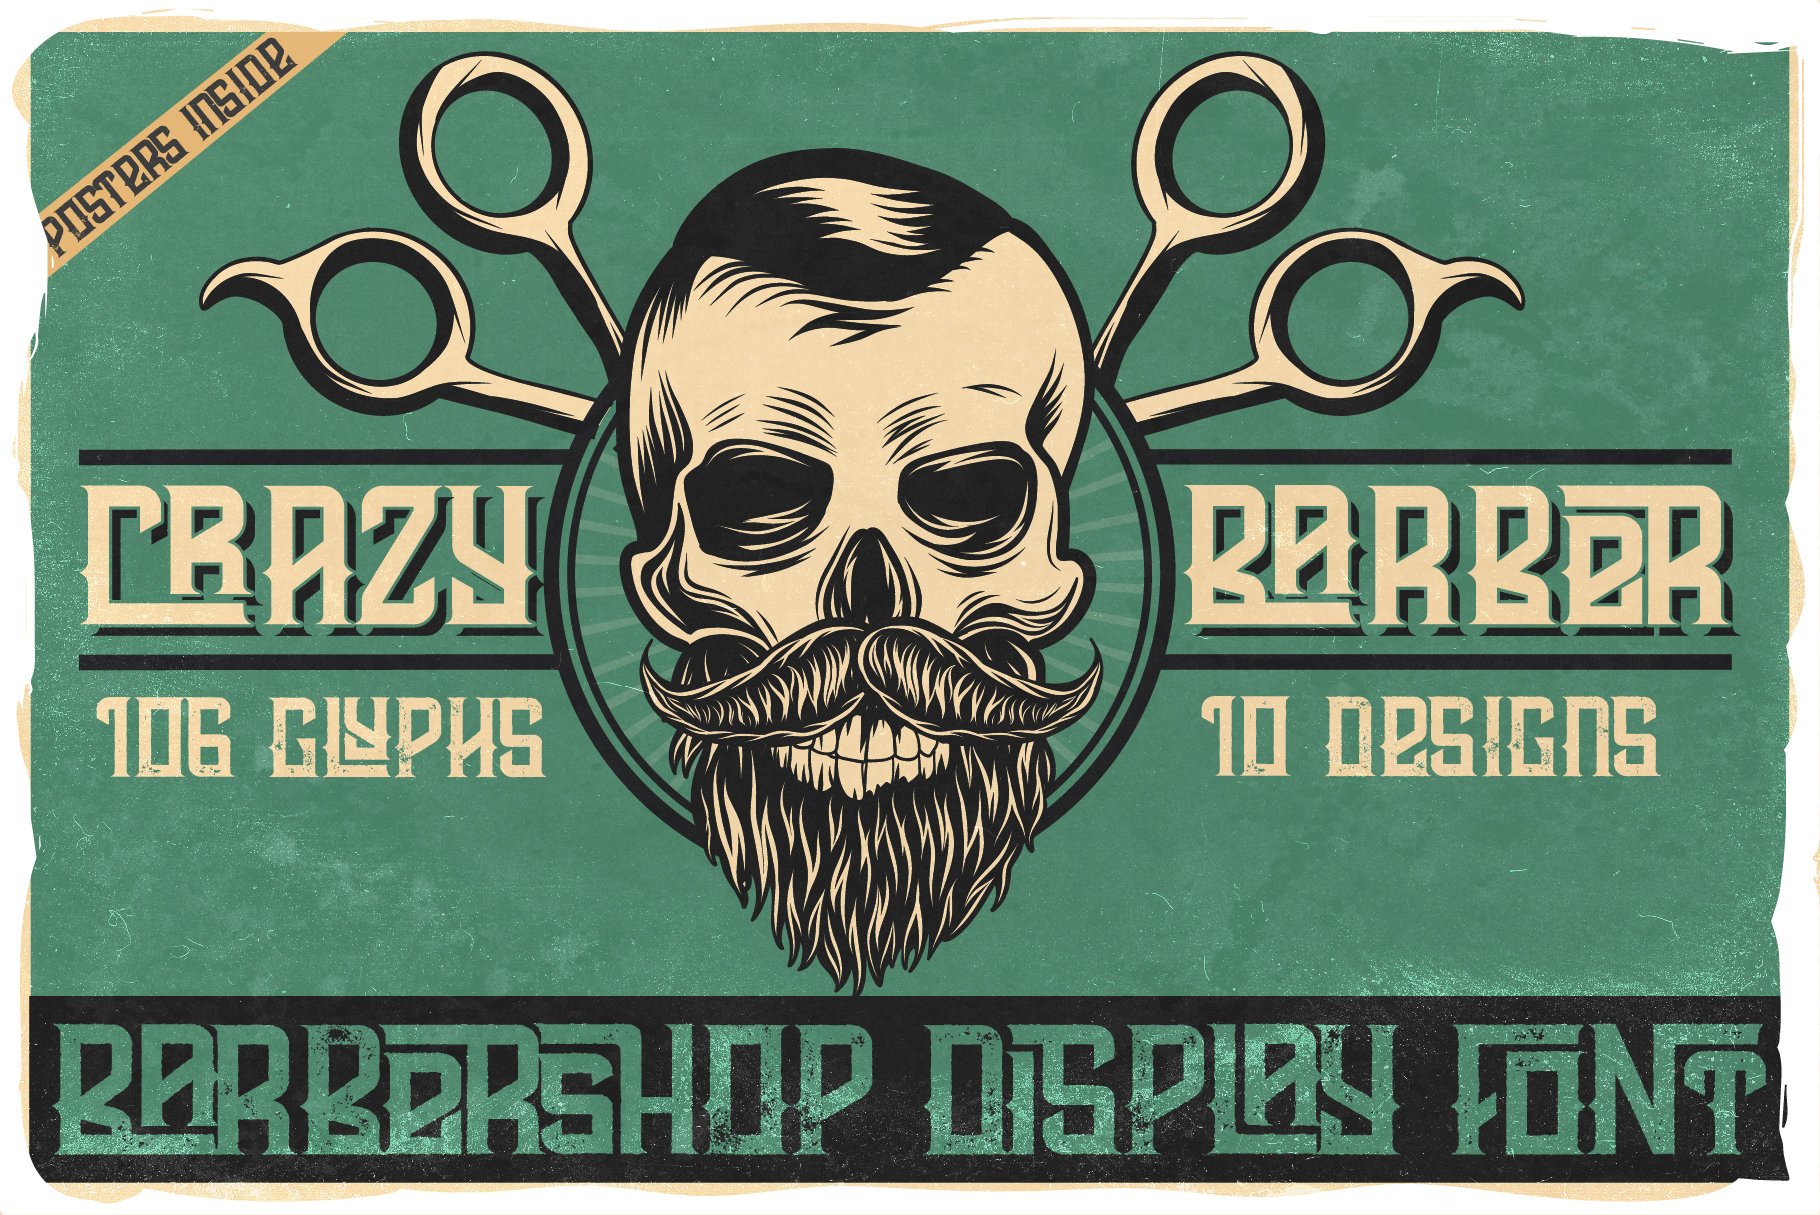 Crazy Barber font with bonuses cover image.